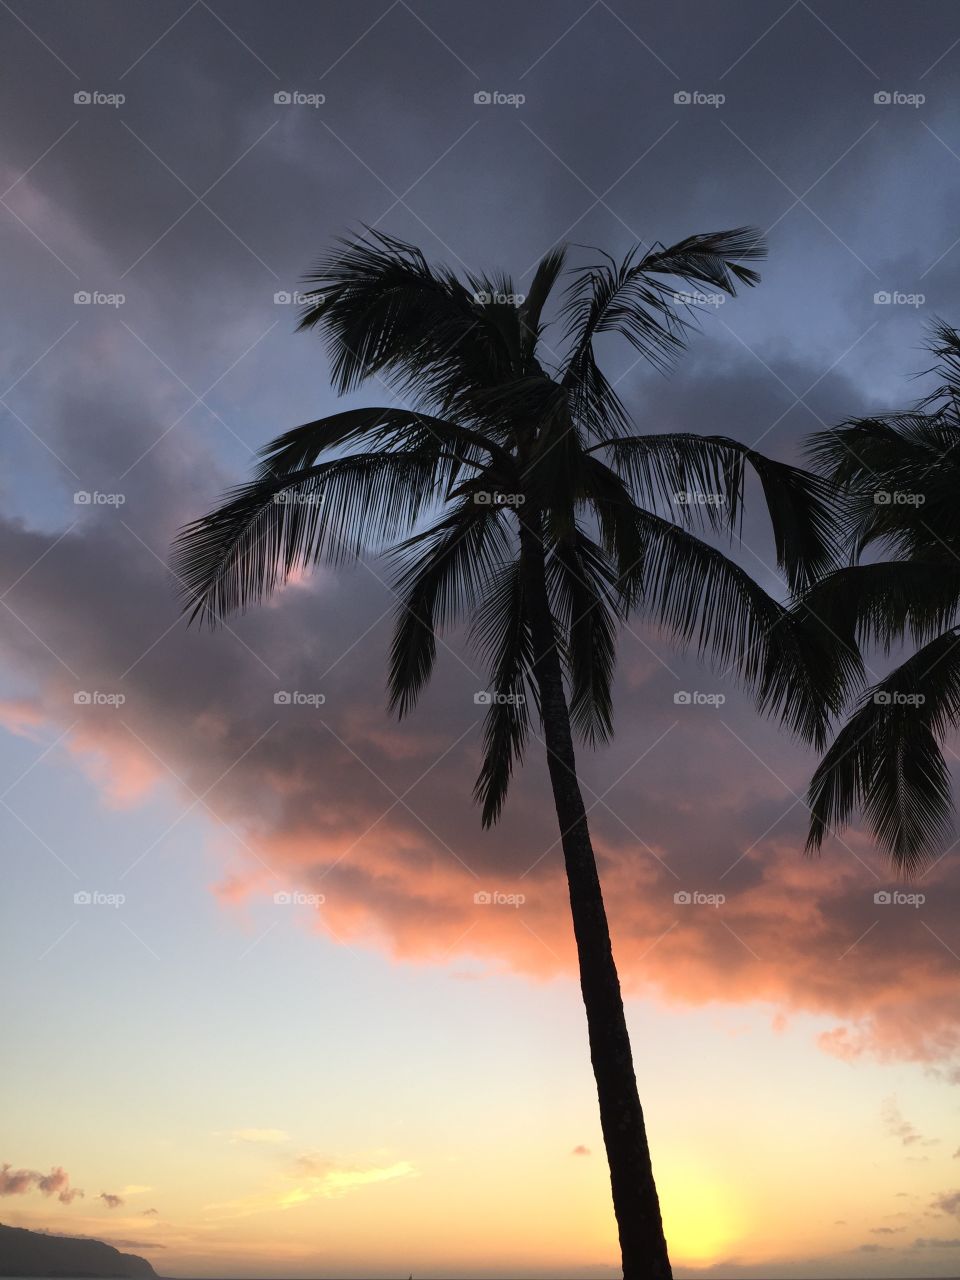 A palm trees in Hawaii 